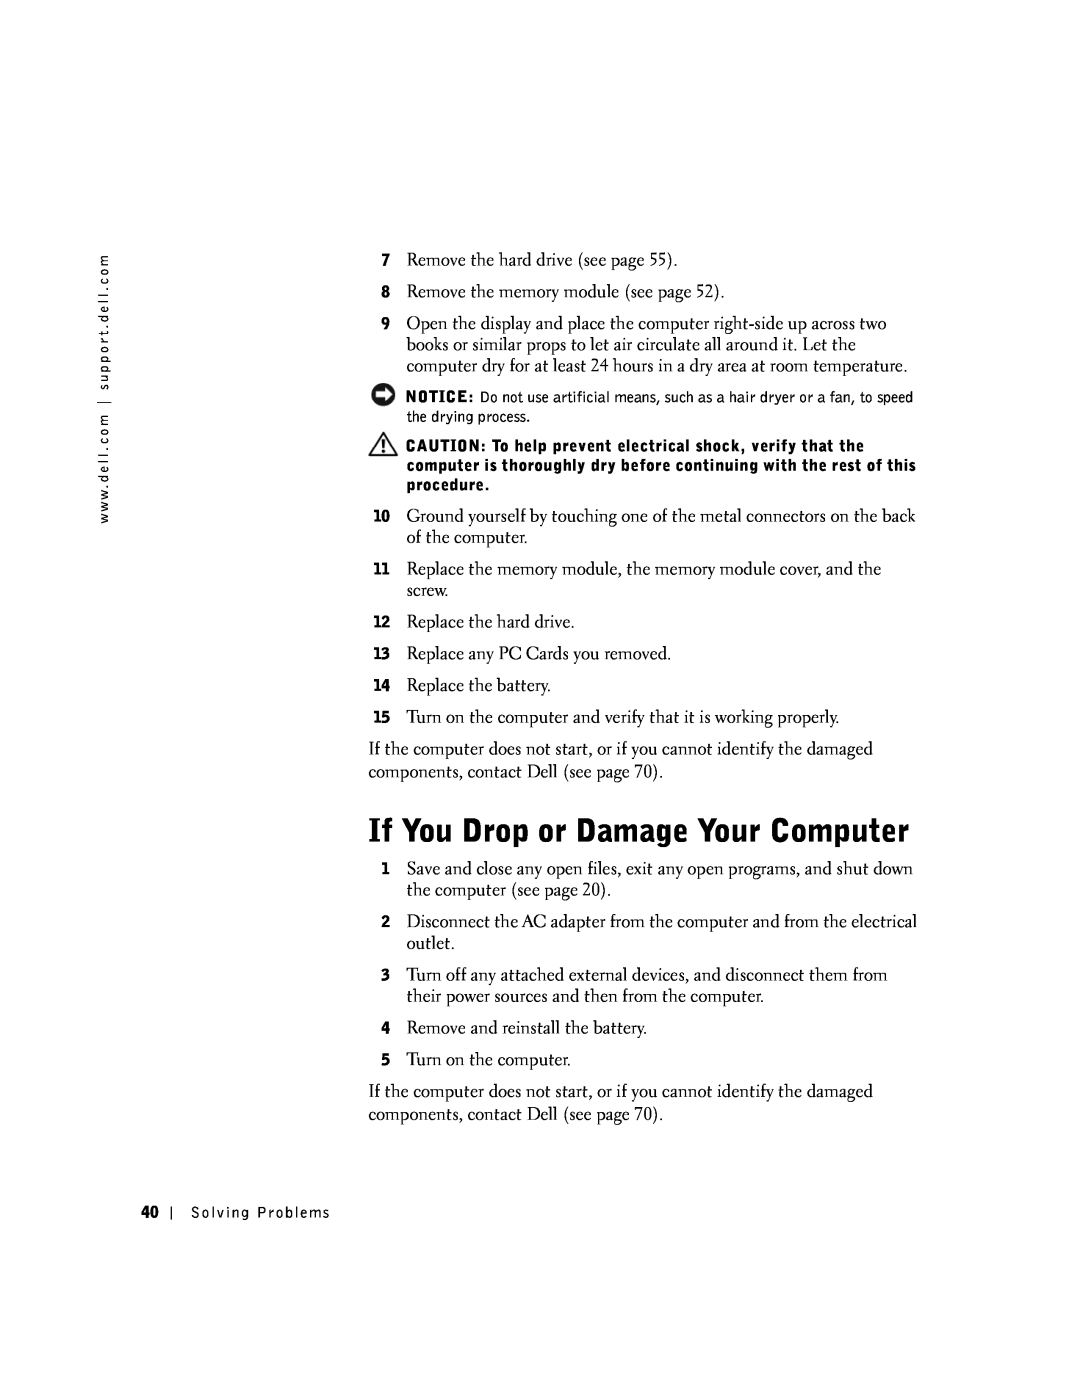 Dell 100N owner manual If You Drop or Damage Your Computer 